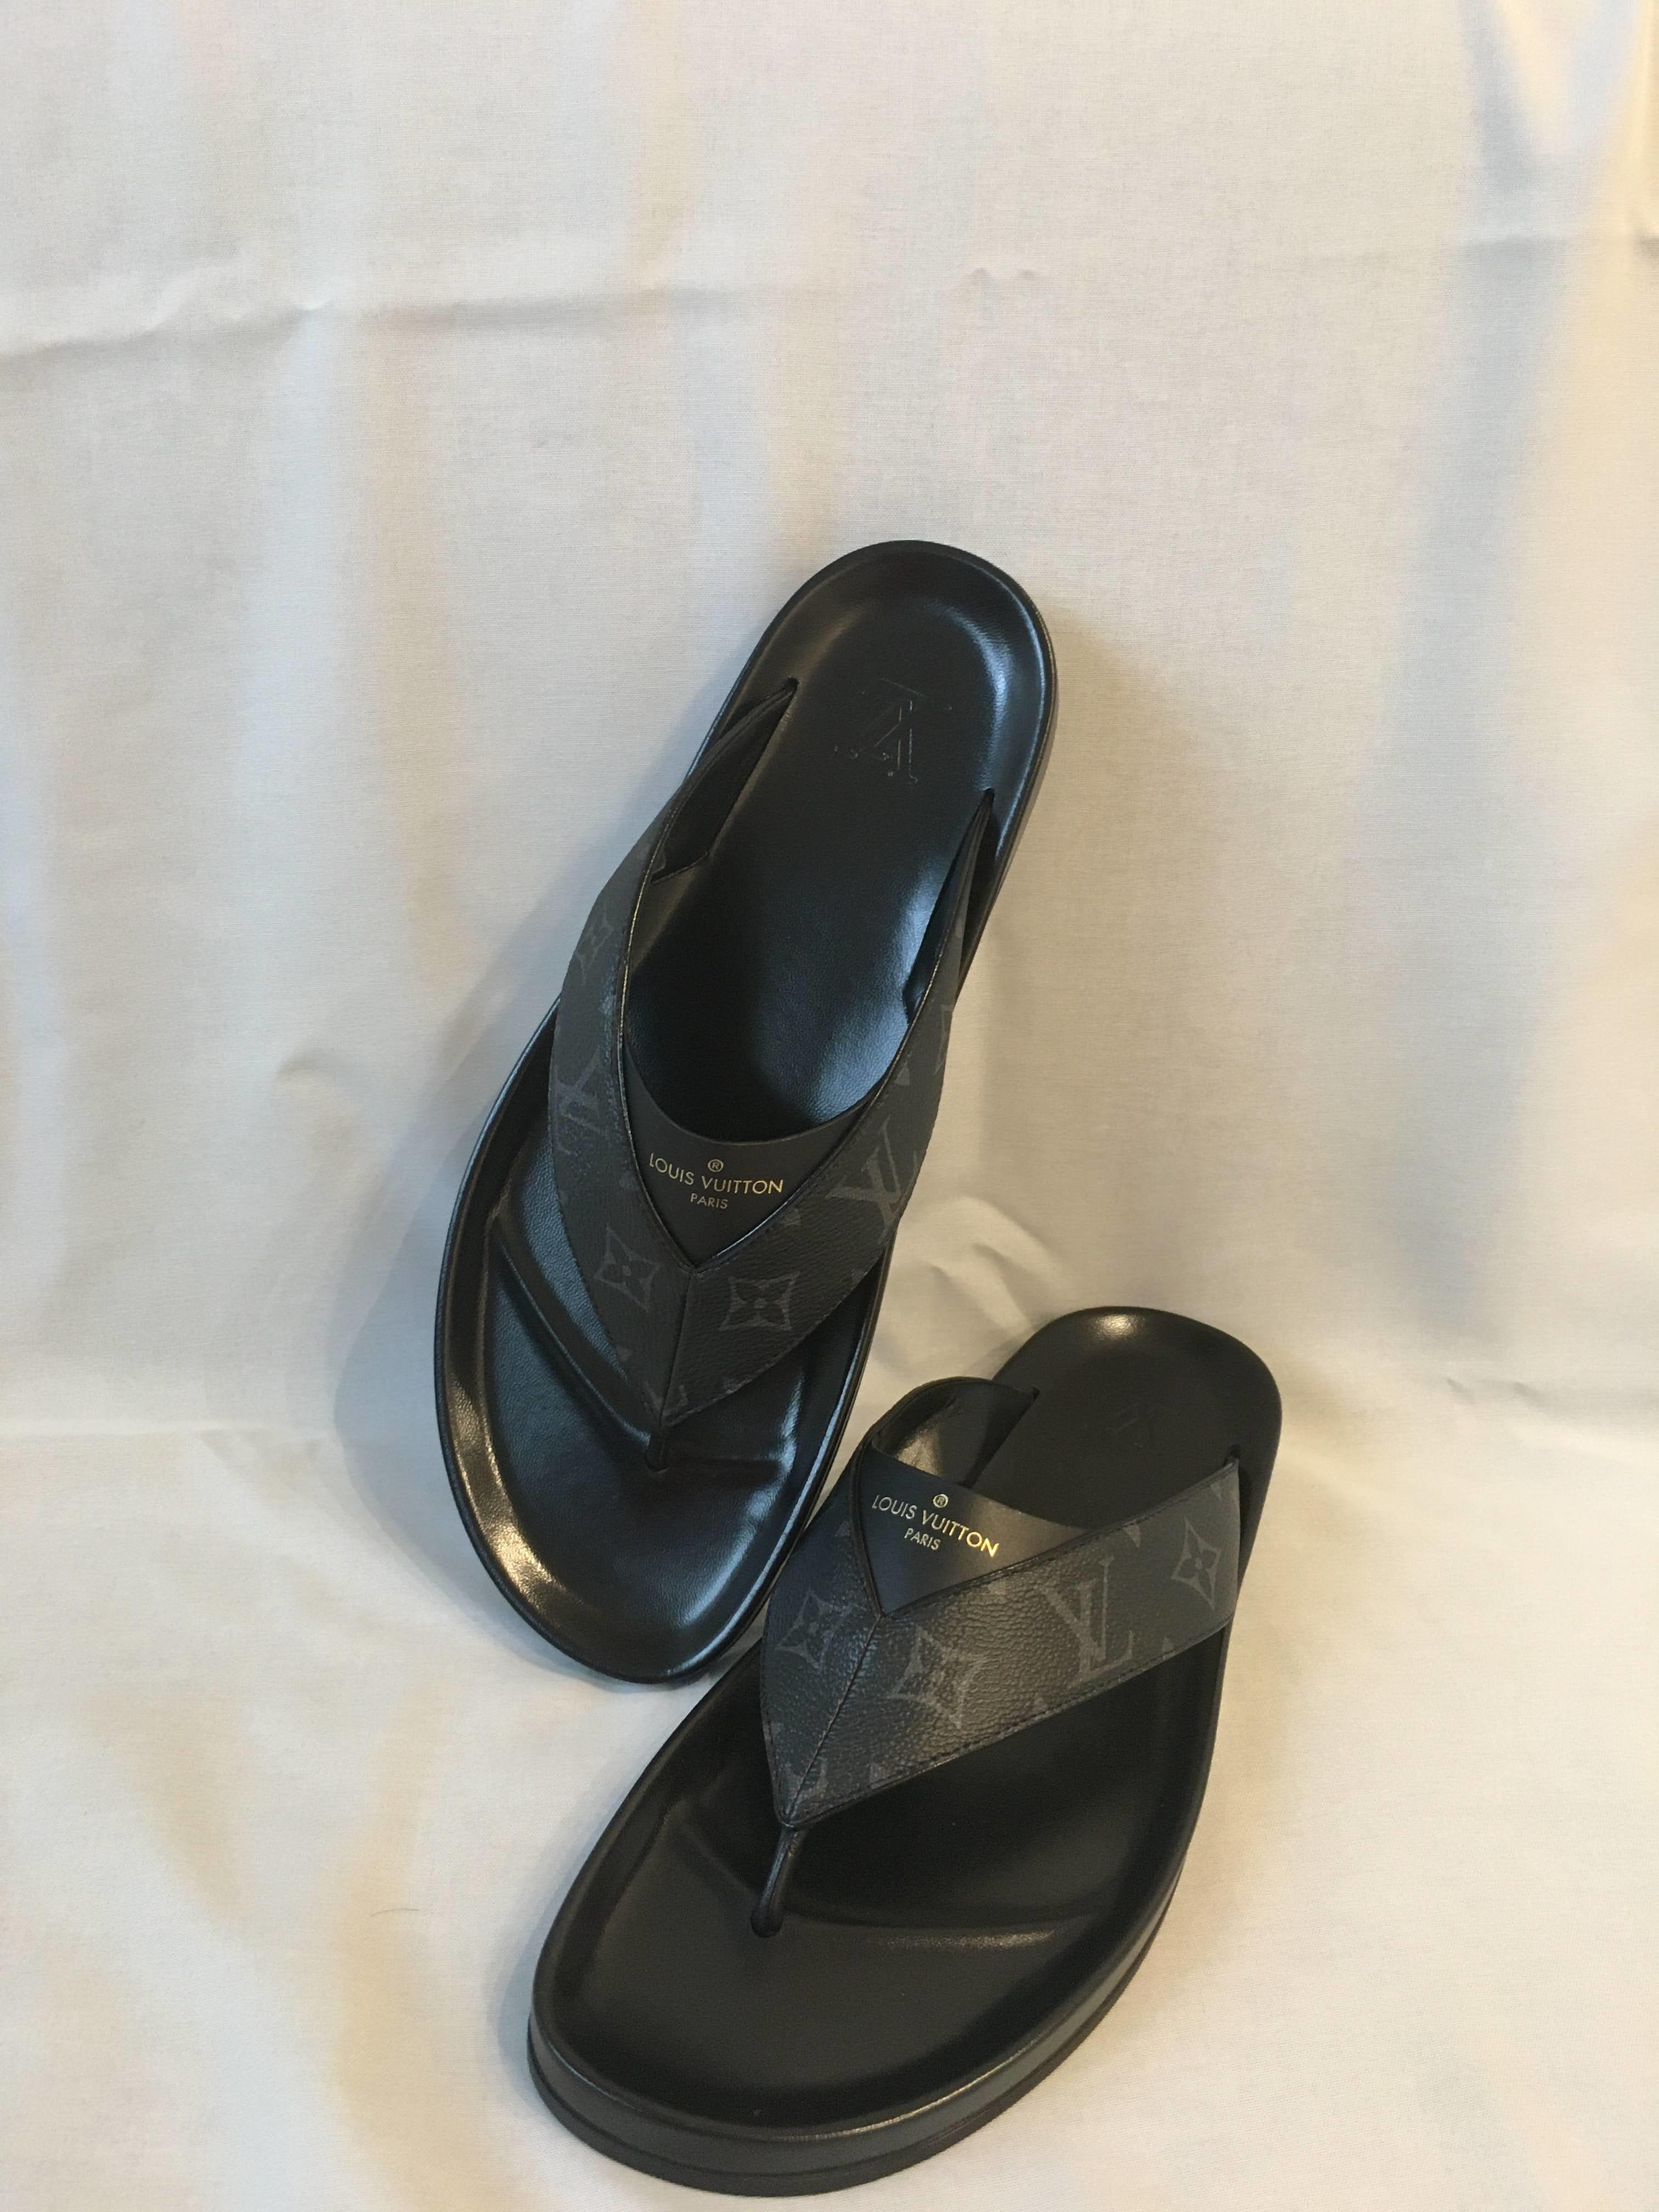 Louis Vuitton Mirabeau Thong Sandals In Black And Grey - Praise To Heaven